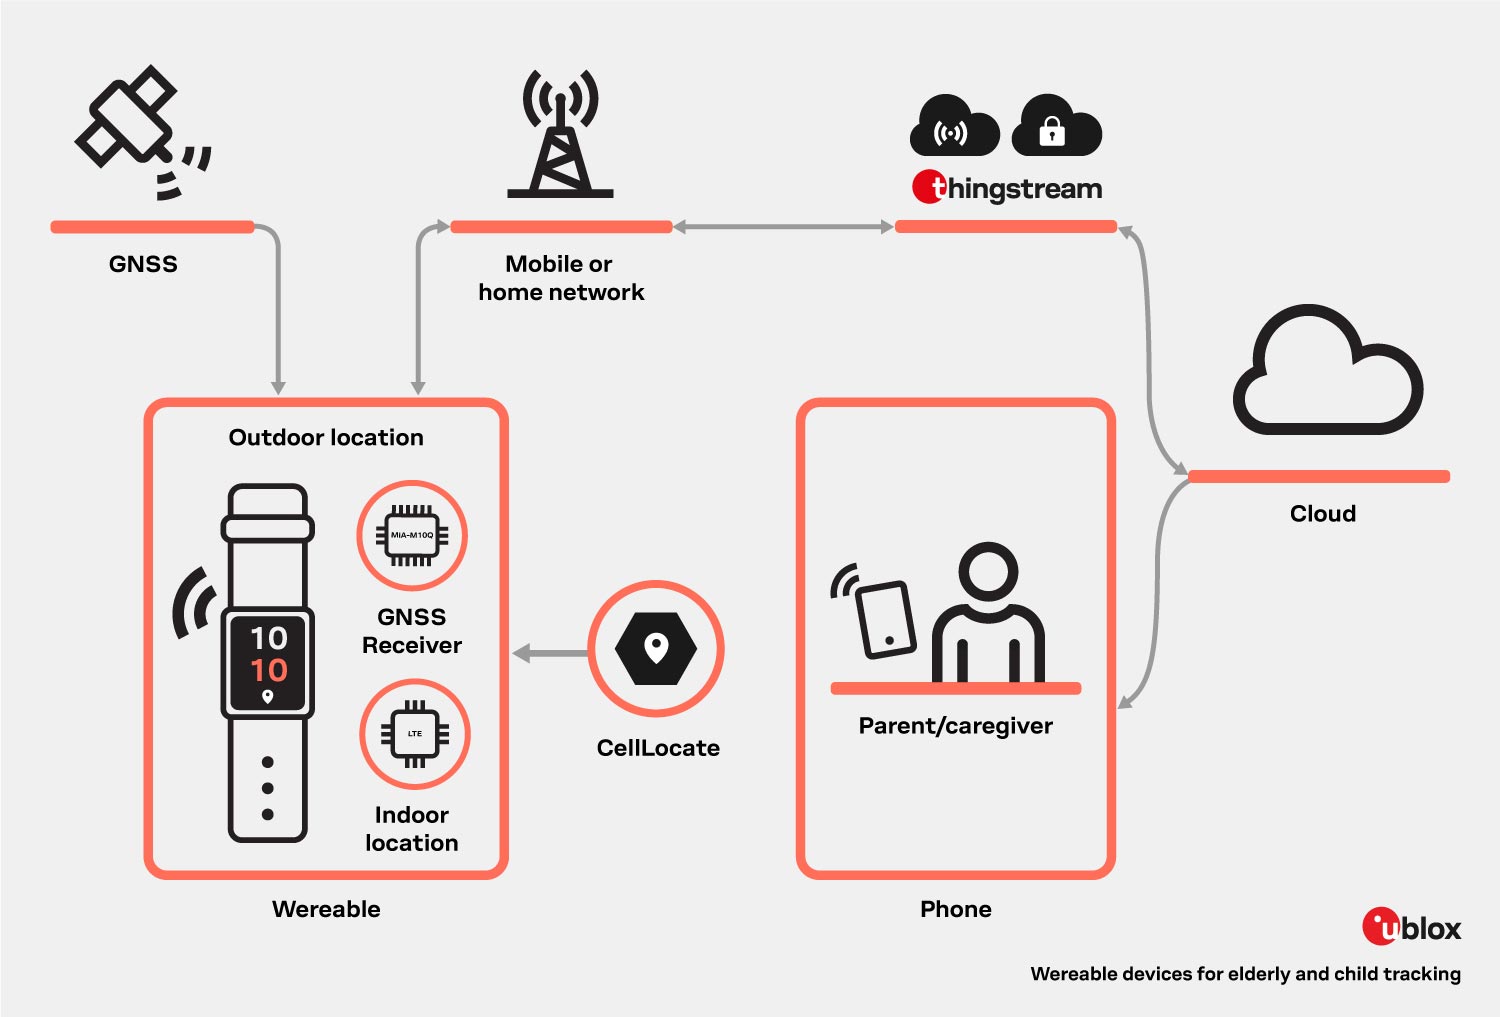 Infographic presenting u-blox solution architecture for wearable devices for elderly and child tracking